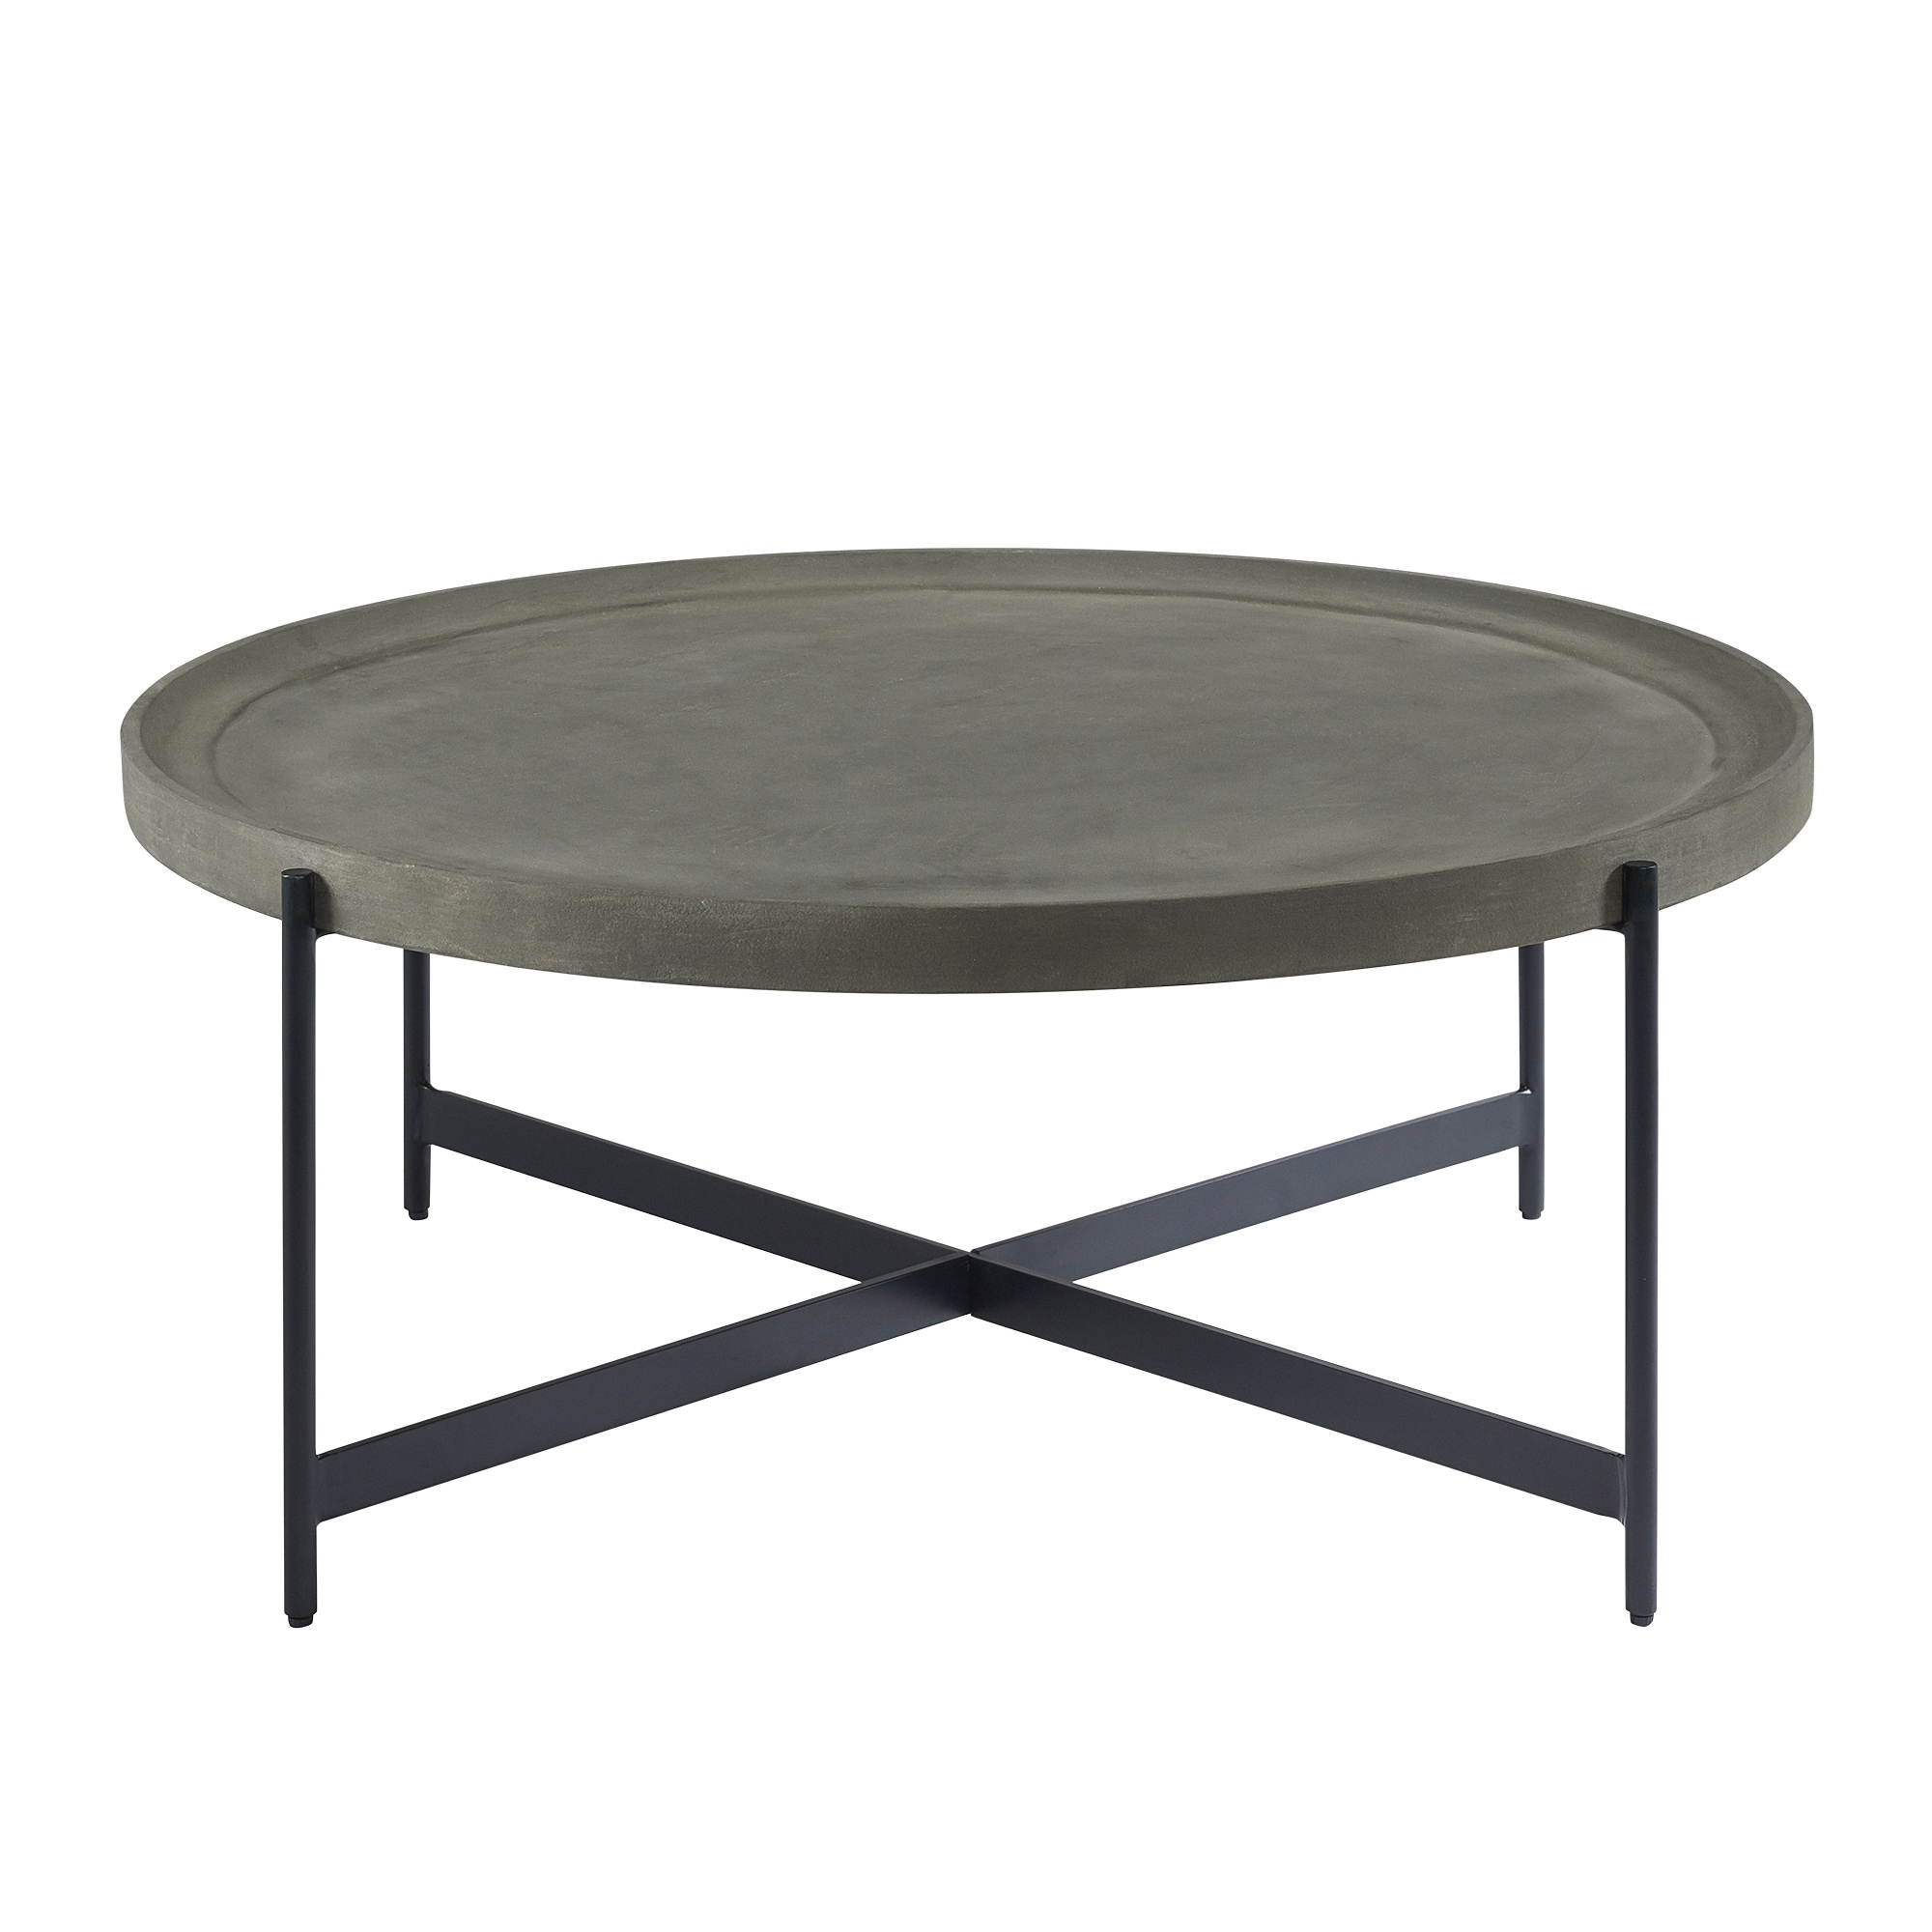 Brookline 42 In Round Wood With Concrete Coating Coffee Table Overstock 32791679